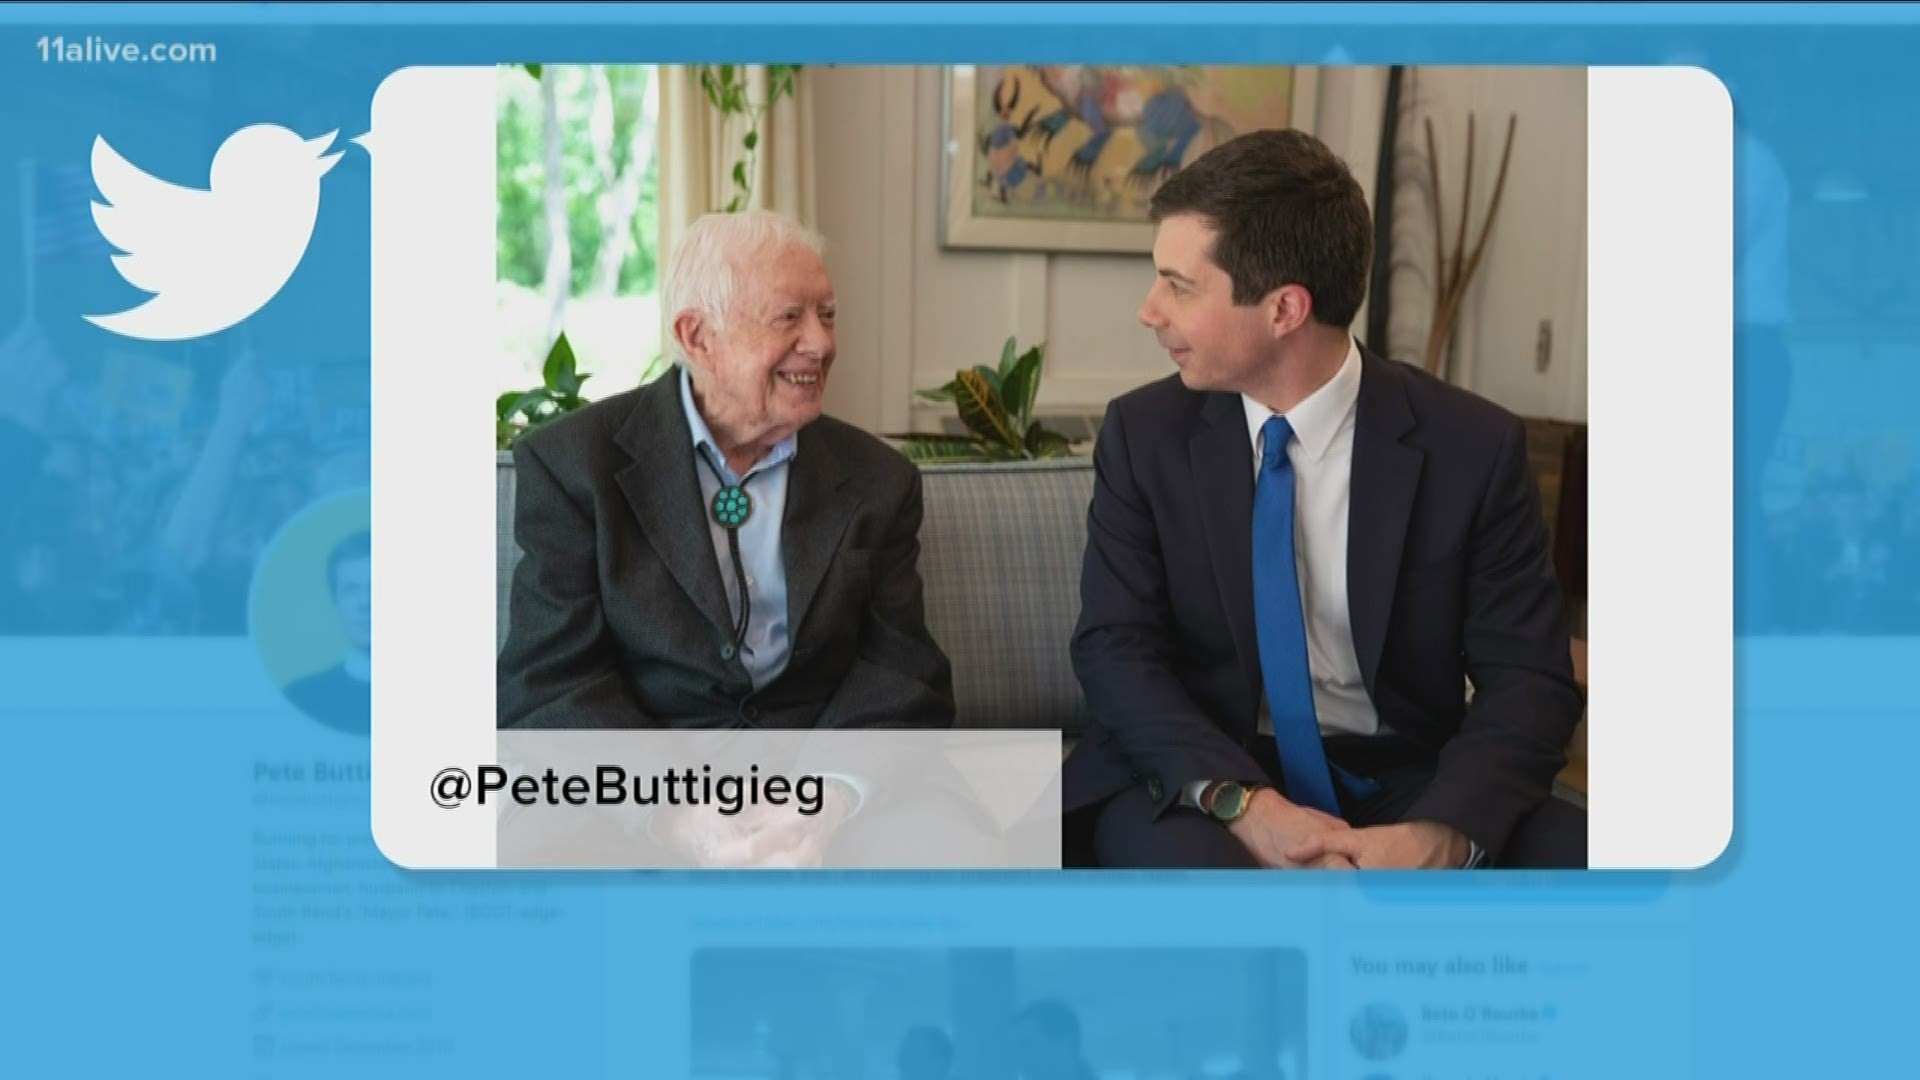 Carter said he knew Buttigieg from working on a Habitat for Humanity project in Indiana where the mayor volunteered.